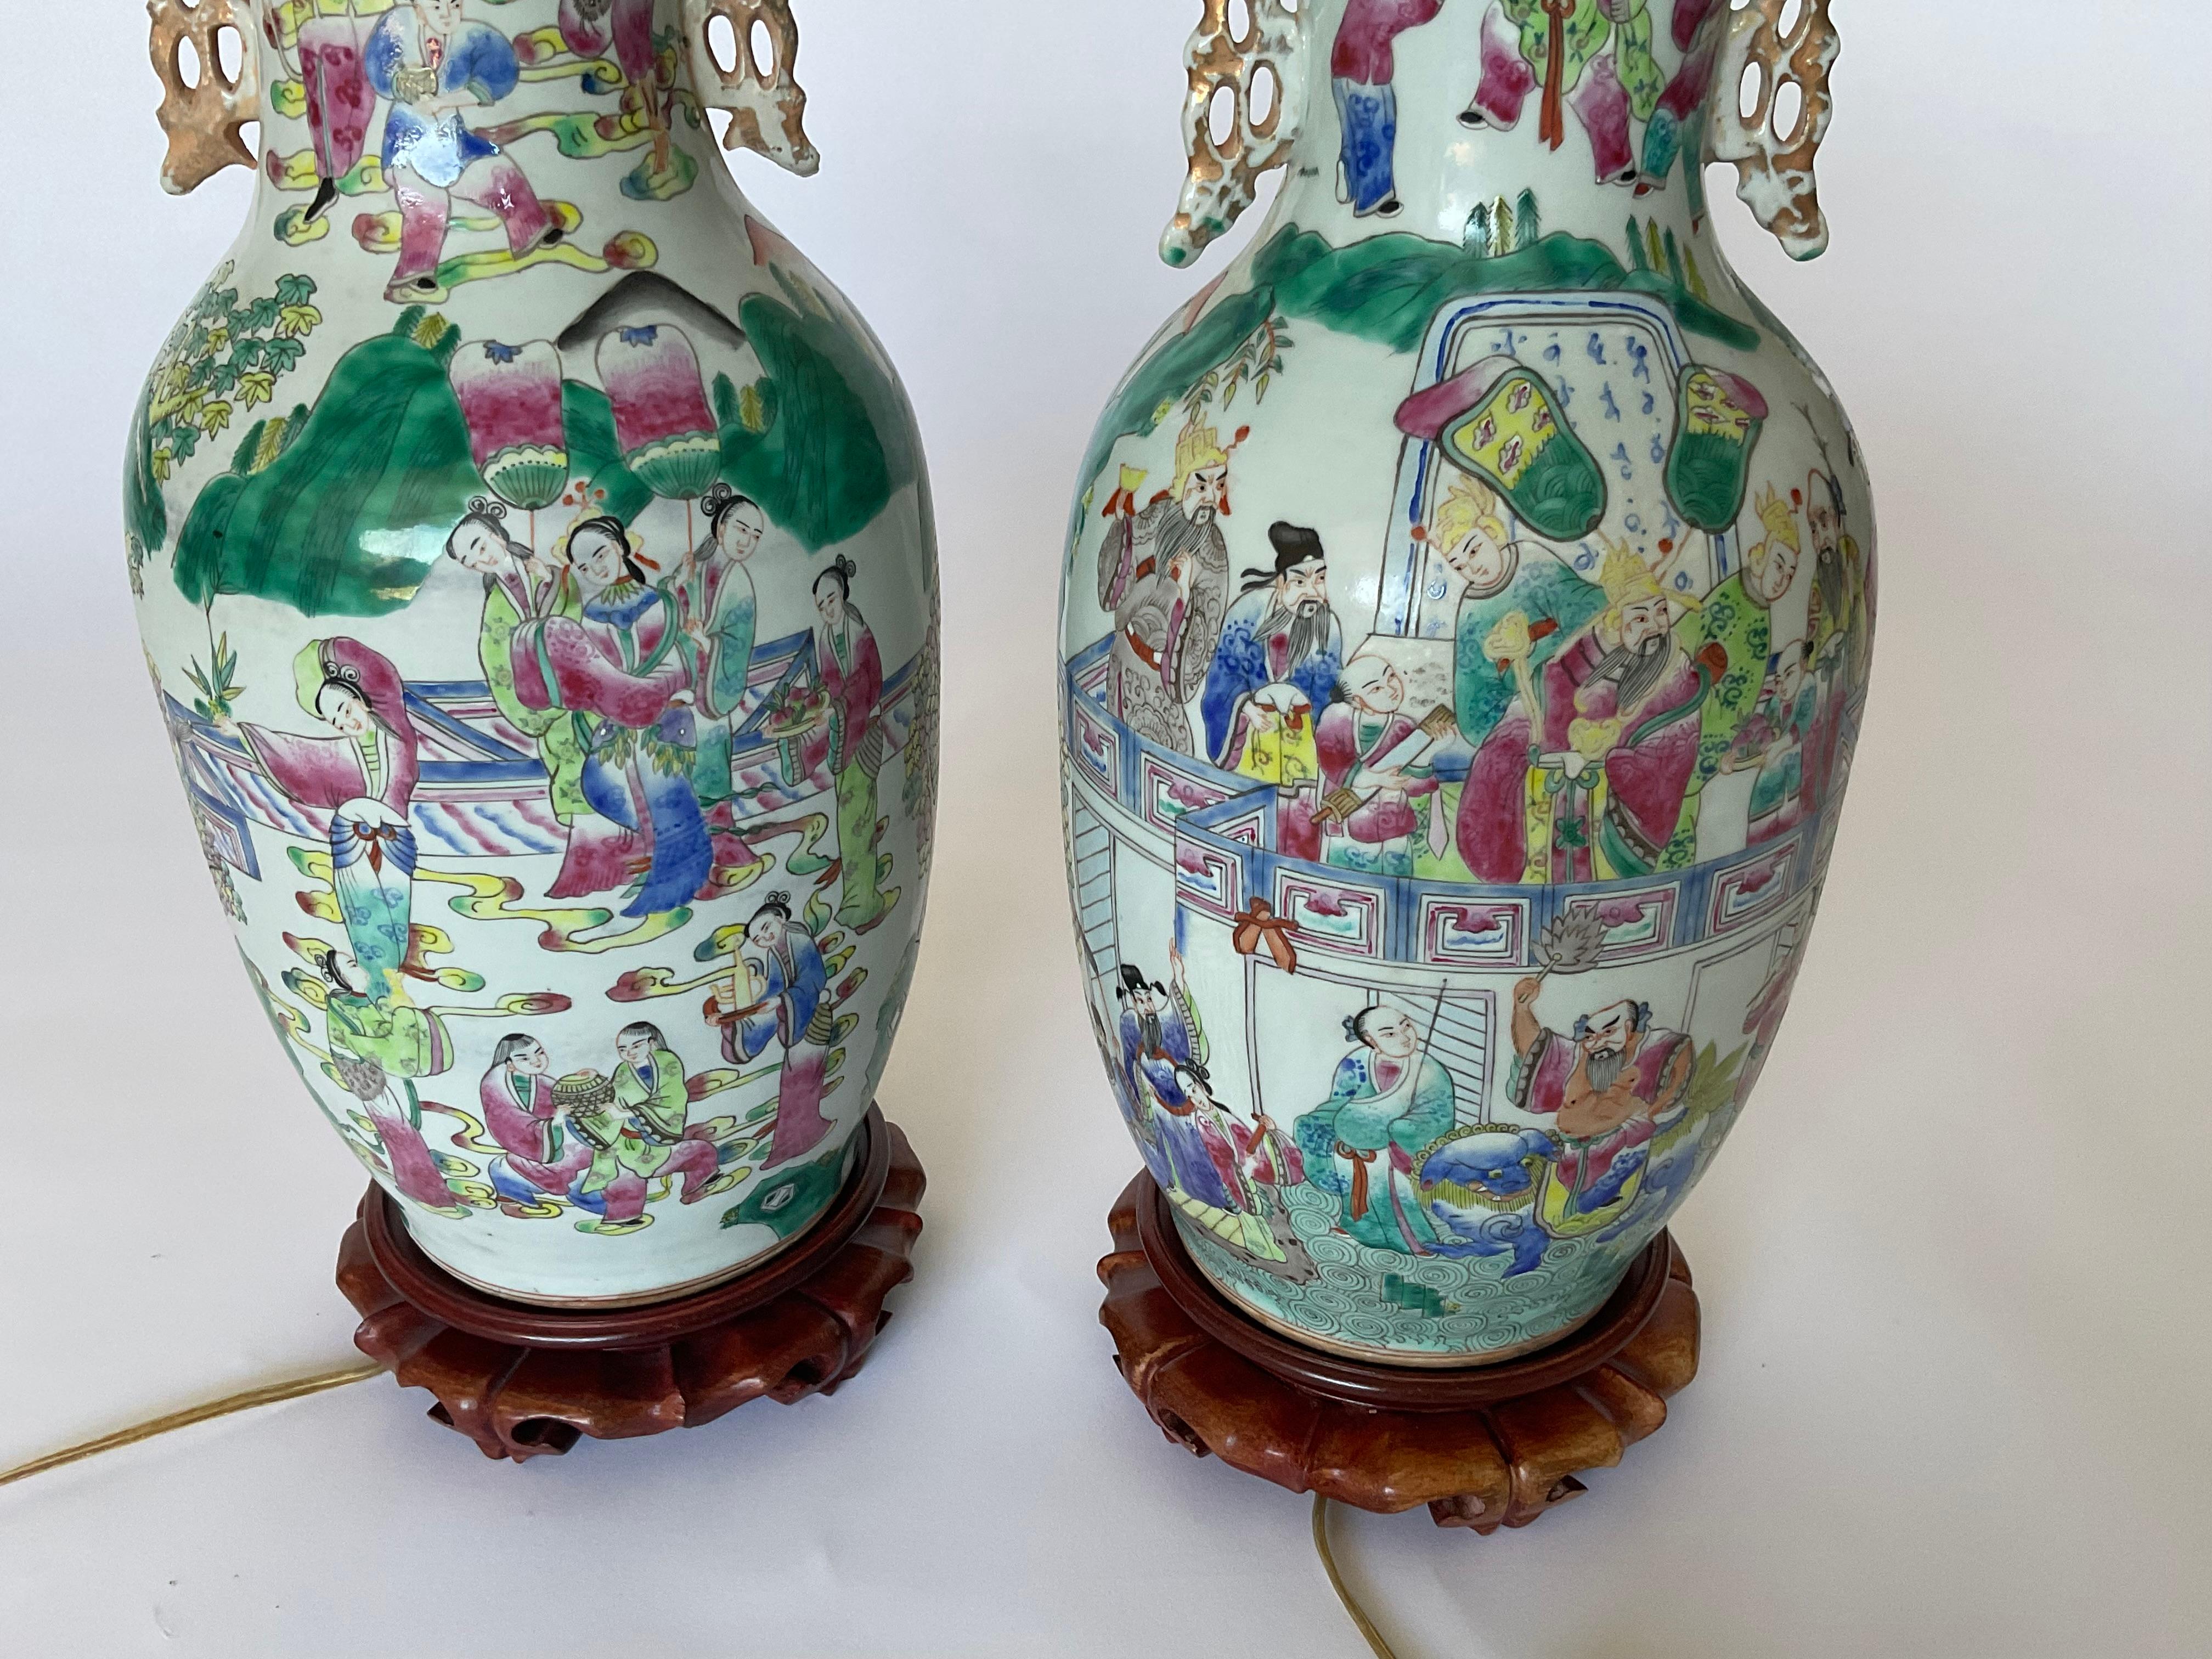 PAIR 19th Century Famille Rose Chinese Porcelain Lamps with handles Very Vibrant colors will enhance any interior. The Porcelain portion measures 16.5 inches tall. 